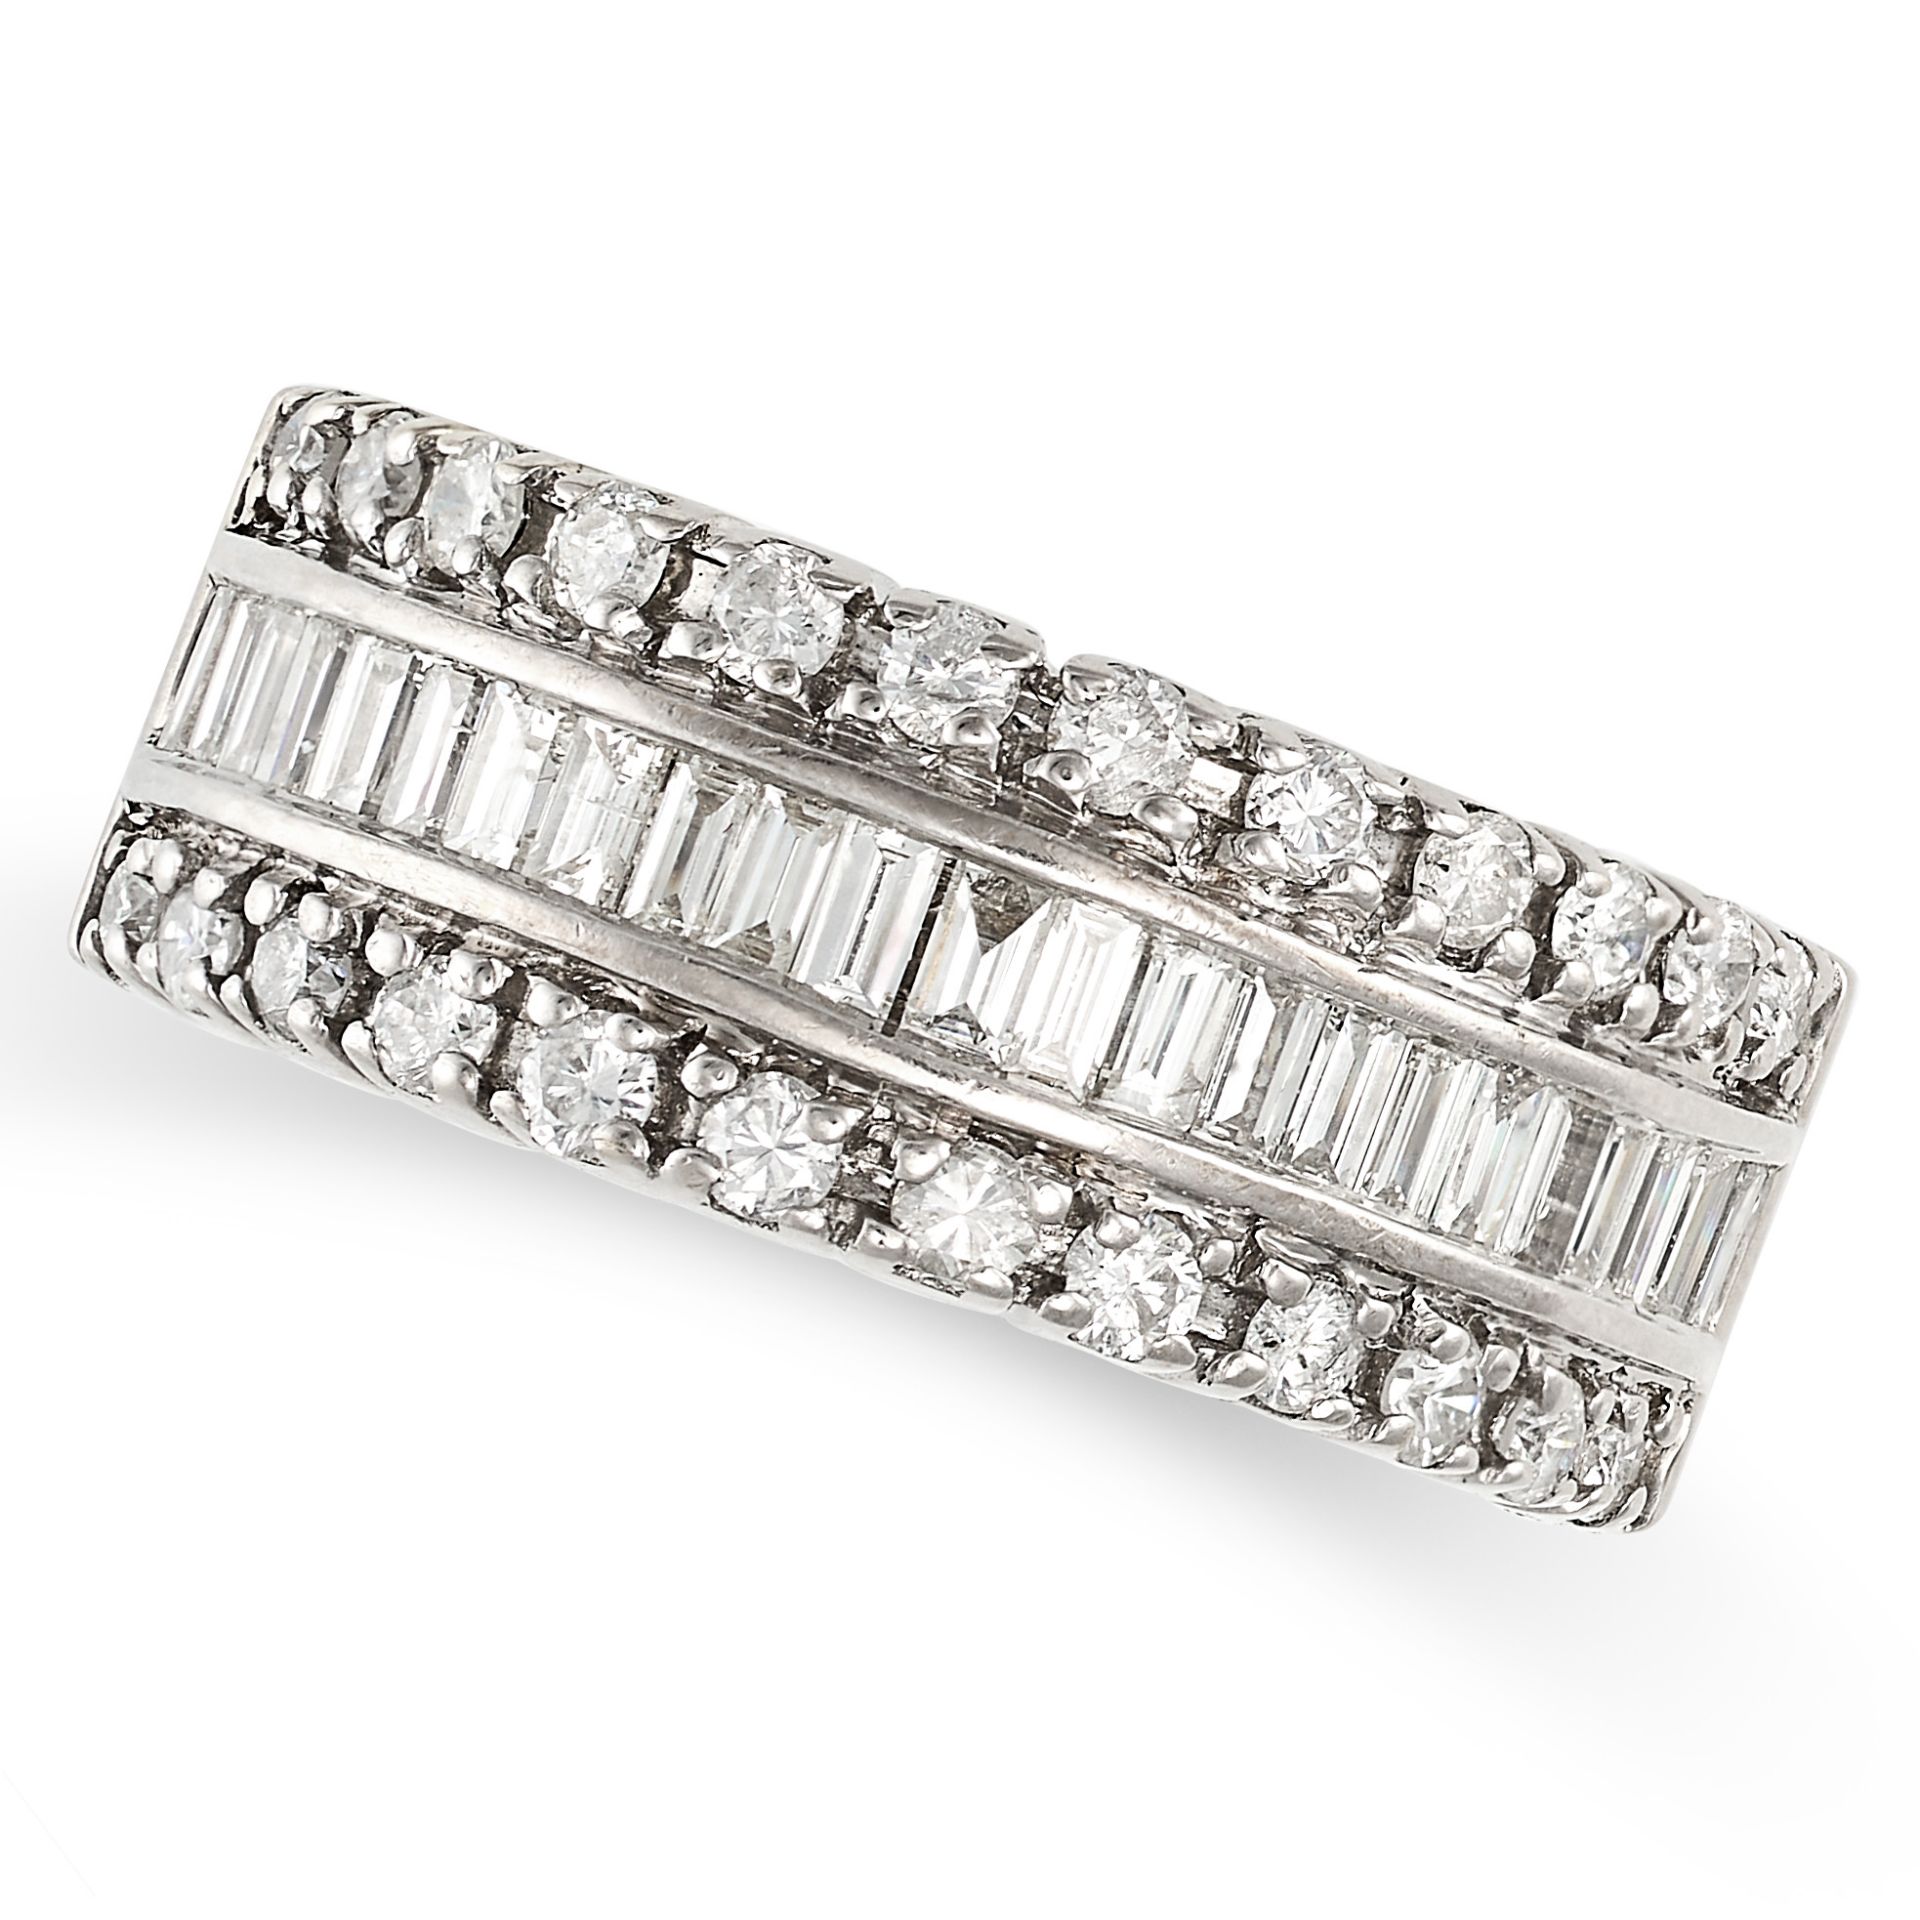 A DIAMOND HALF ETERNITY RING in 18ct white gold, set with a row of baguette cut diamonds accented...